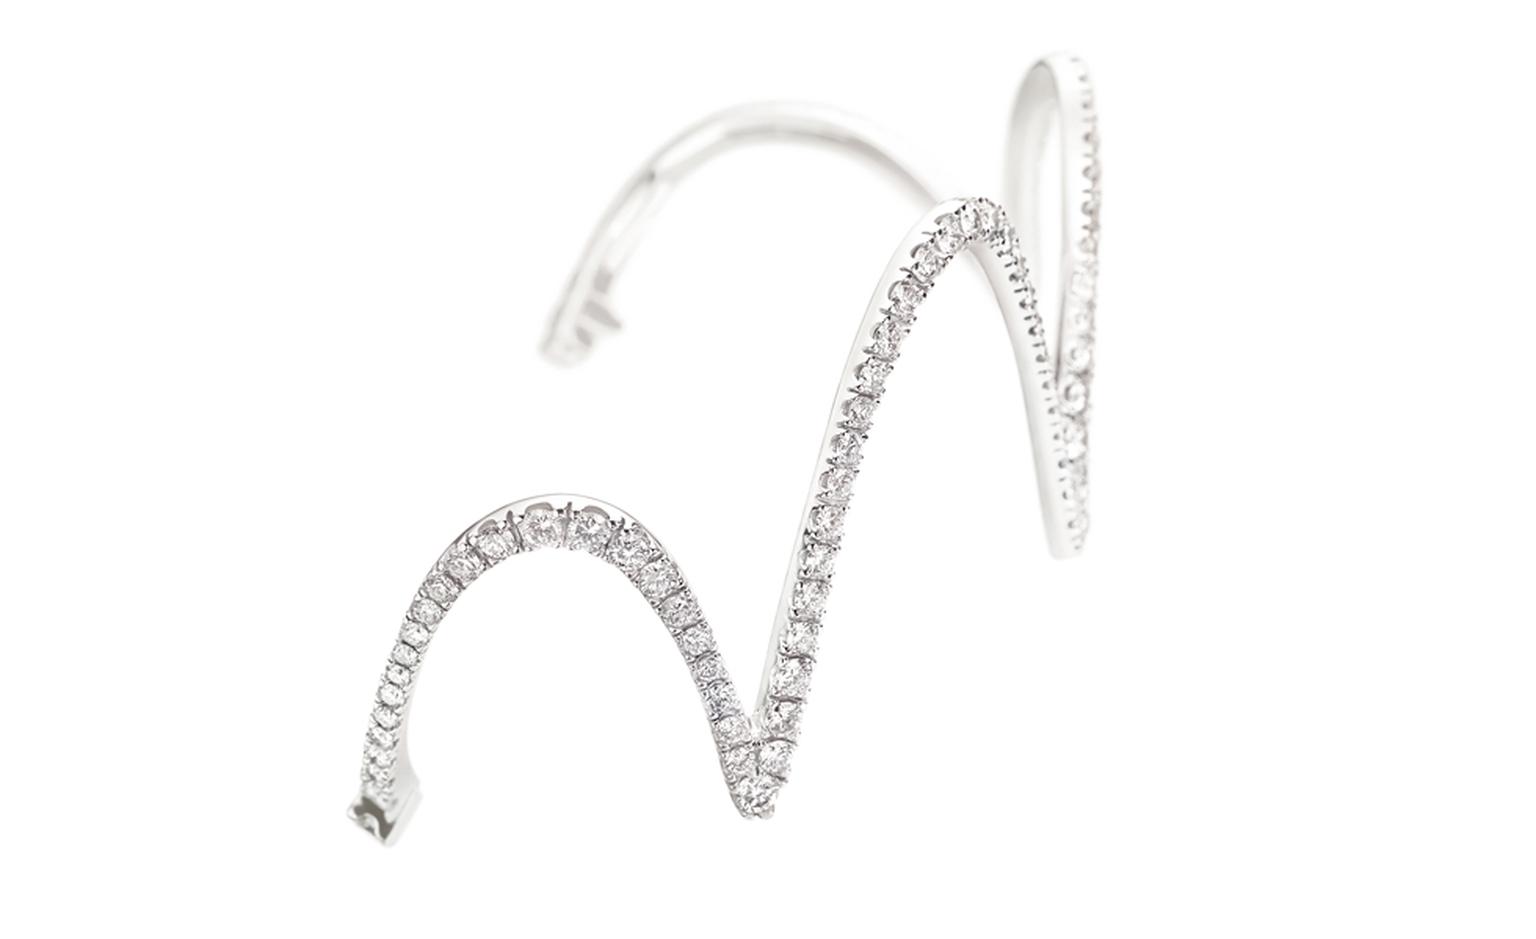 PAMPULHA Bracelet in white gold and diamonds.